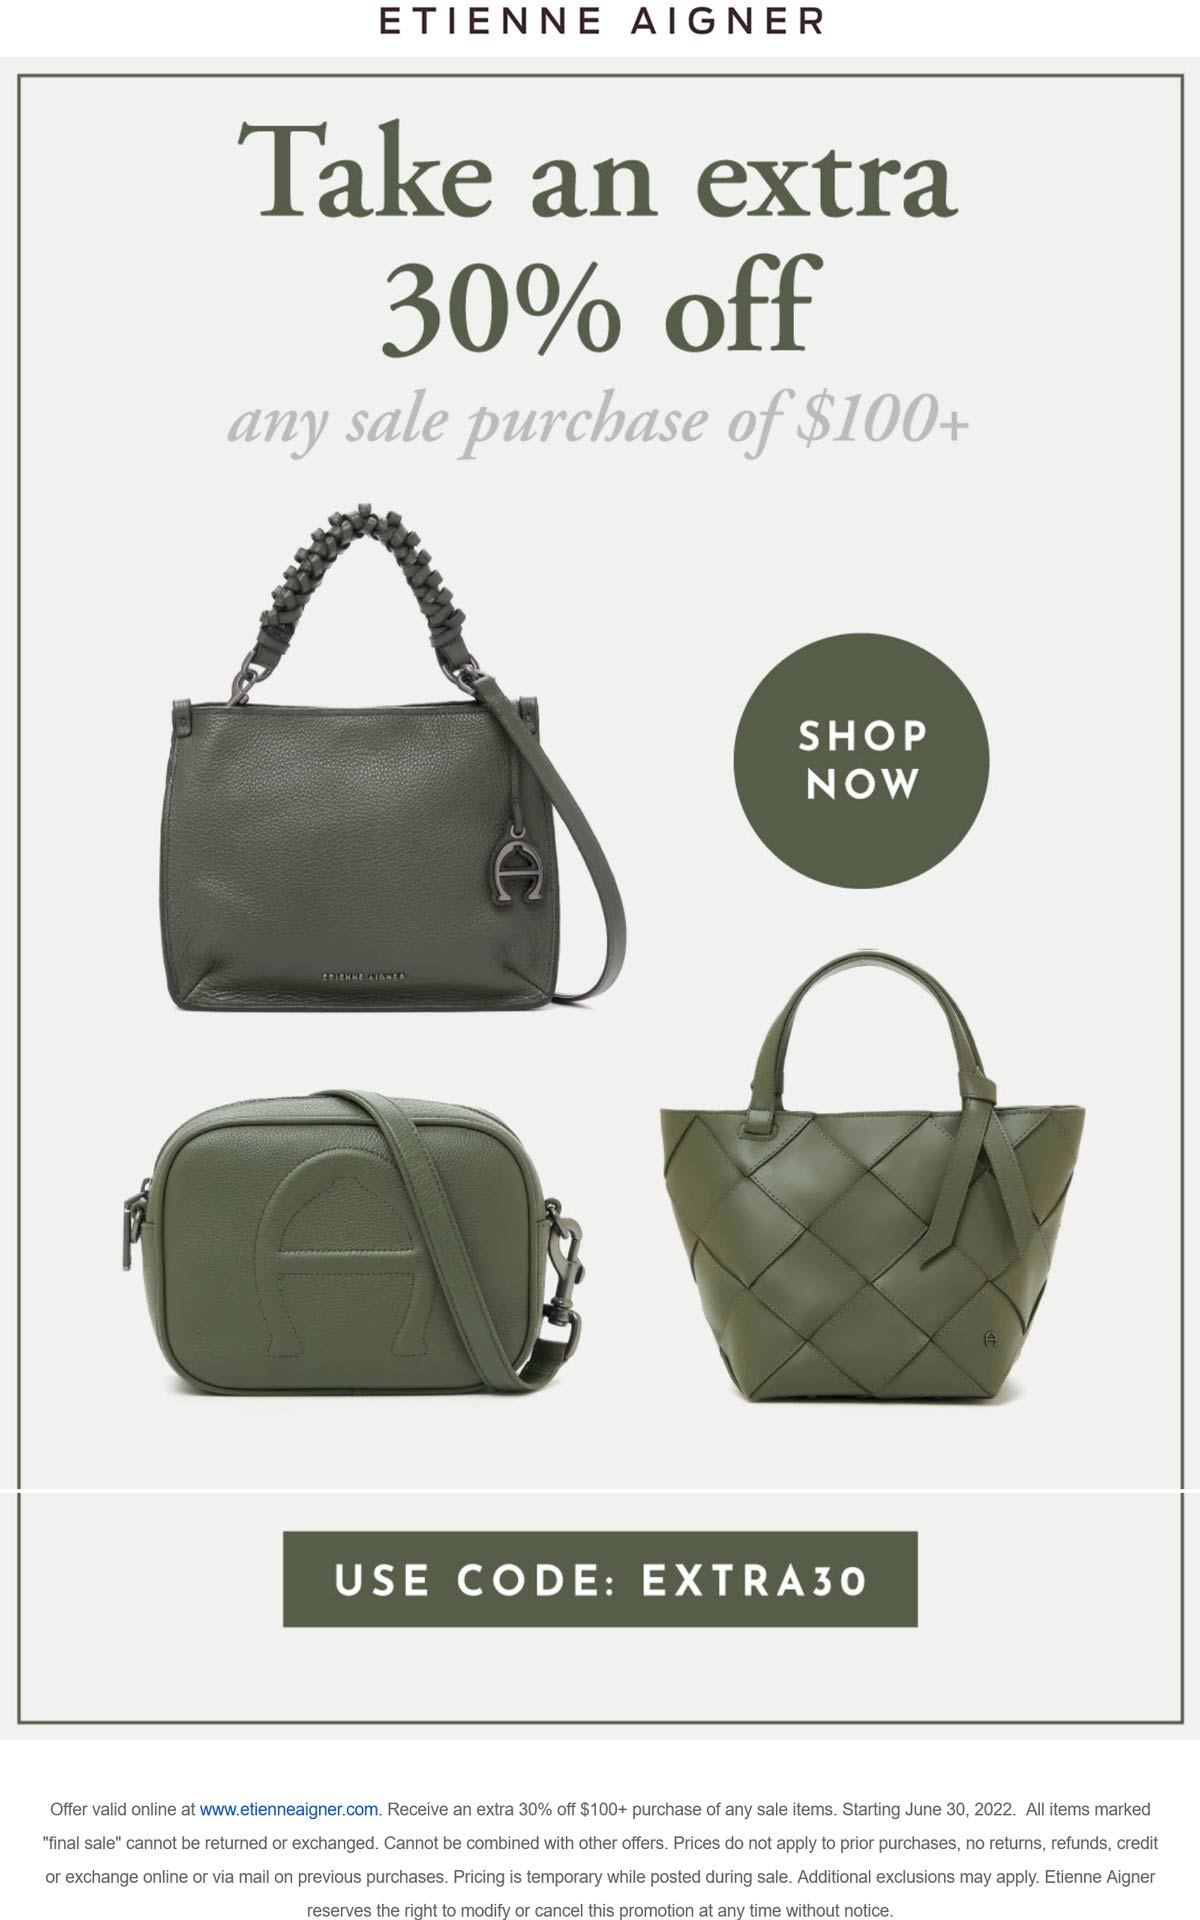 Etienne Aigner stores Coupon  Extra 30% off $100 on sale items at Etienne Aigner via promo code EXTRA30 #etienneaigner 